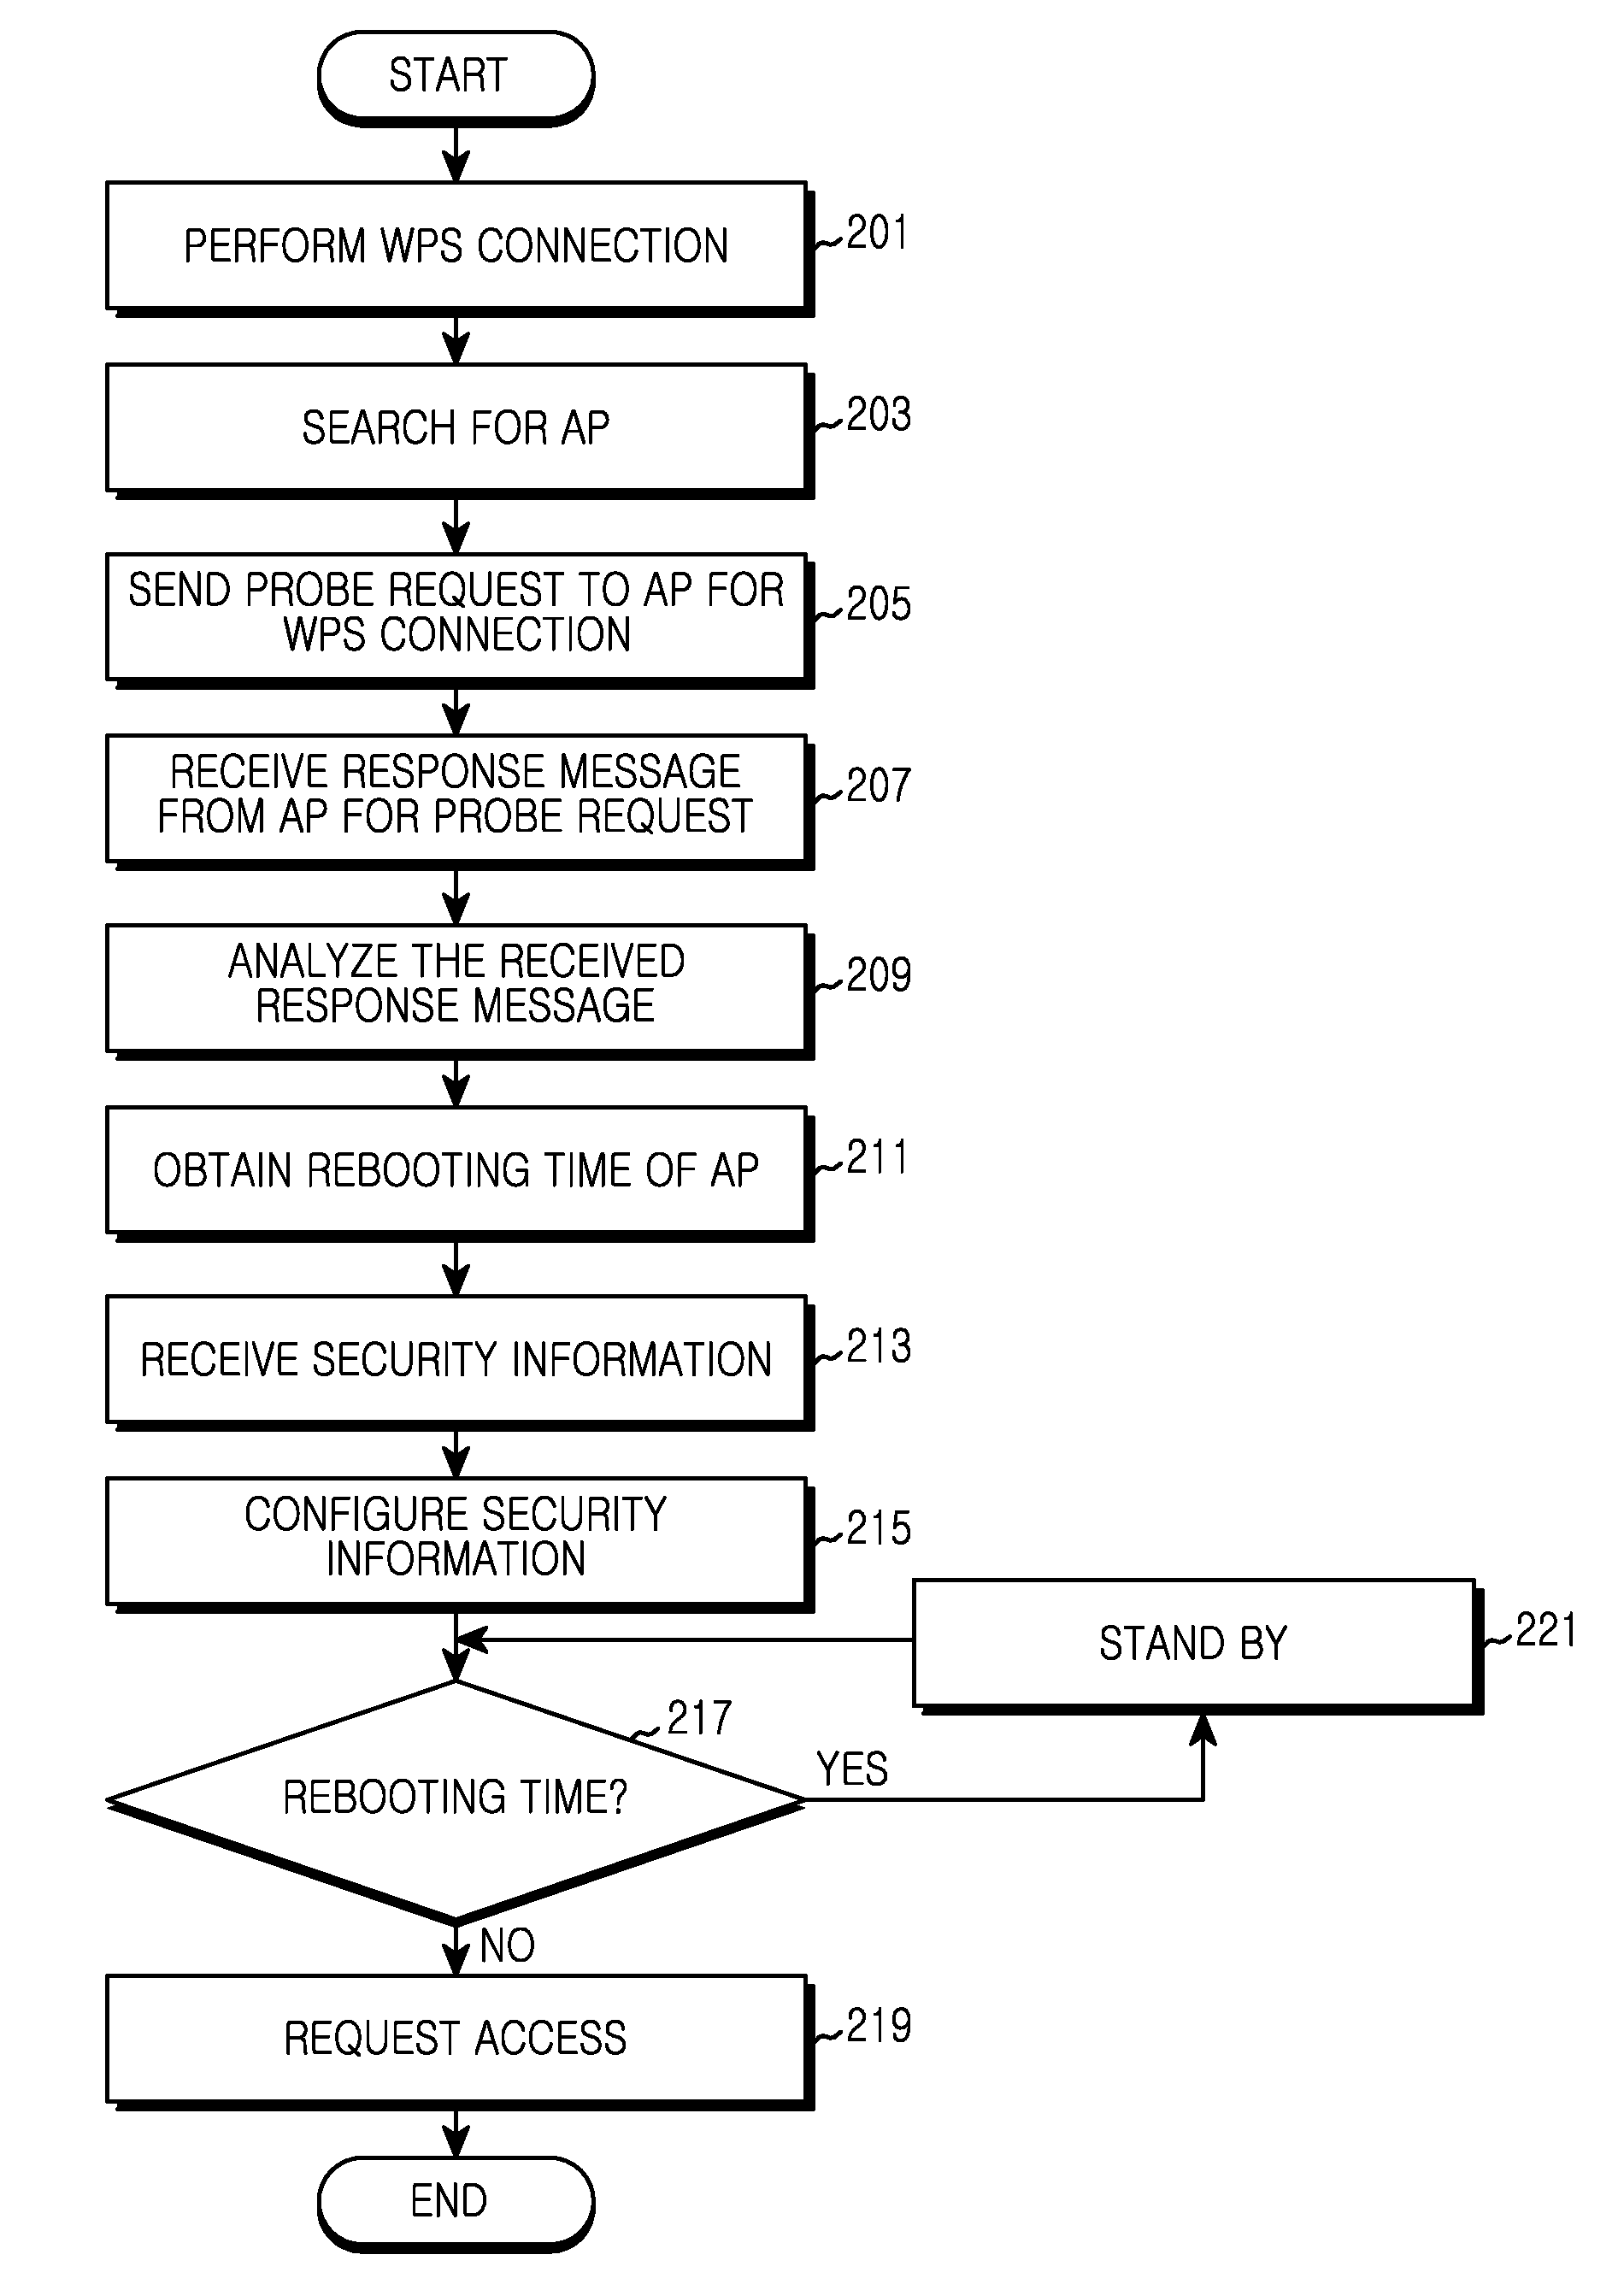 Apparatus and method for improving capability of wi-fi in wireless communication system